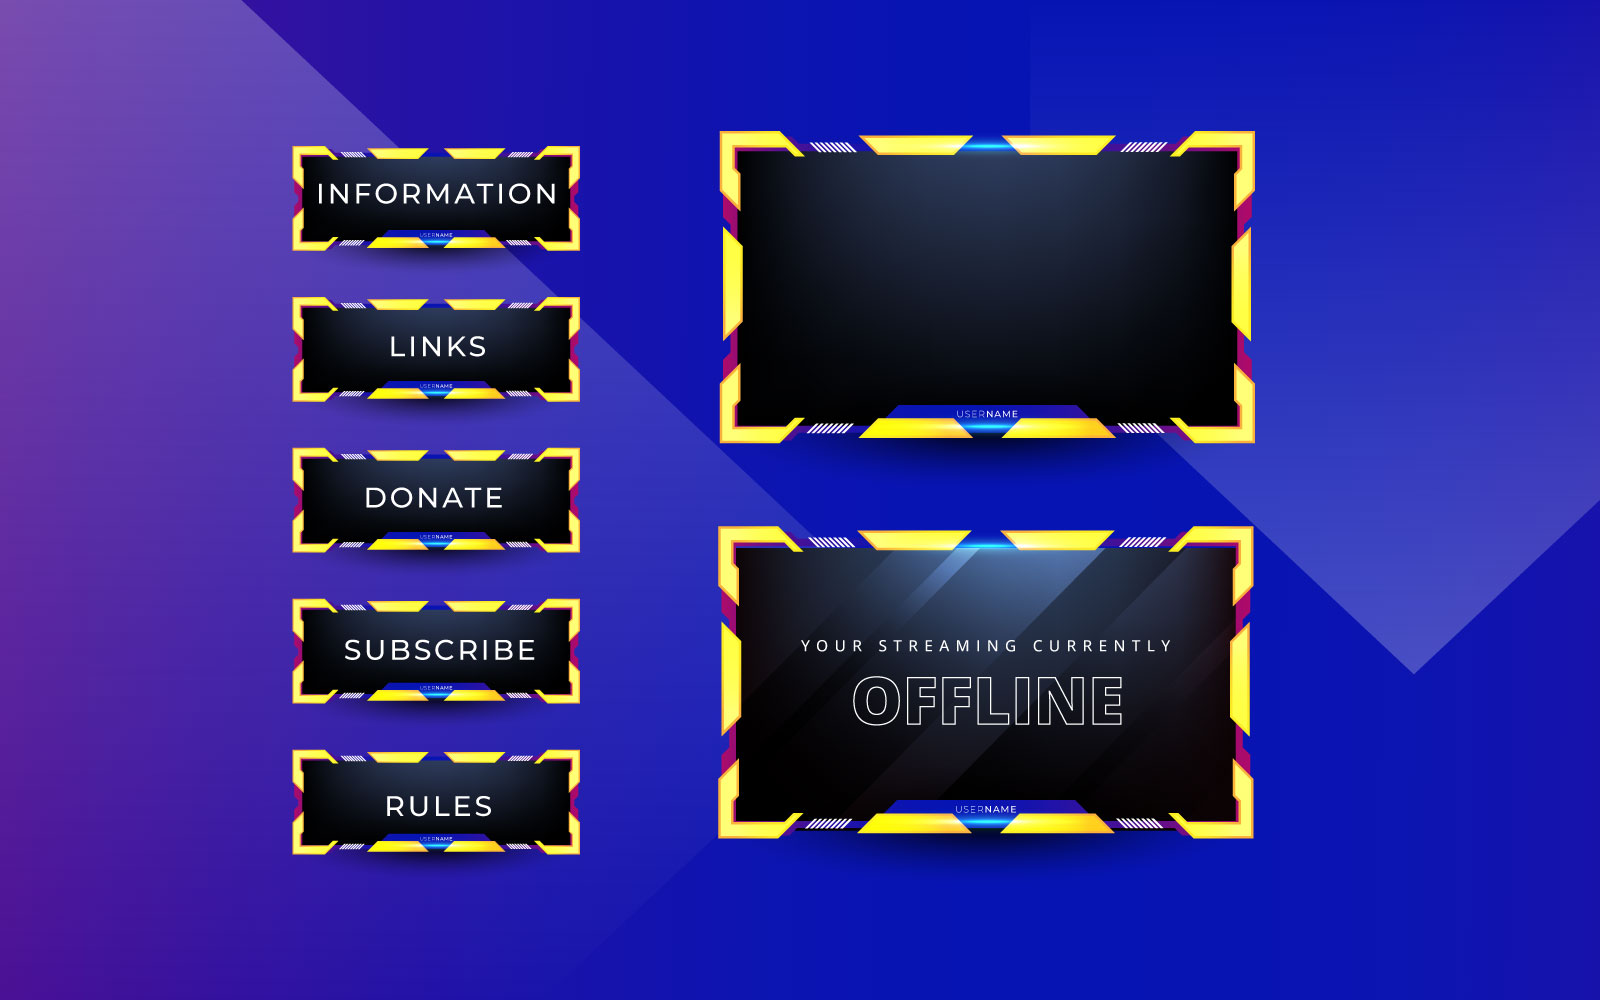 Streaming screen panel overlay design template theme. Live video, online stream live